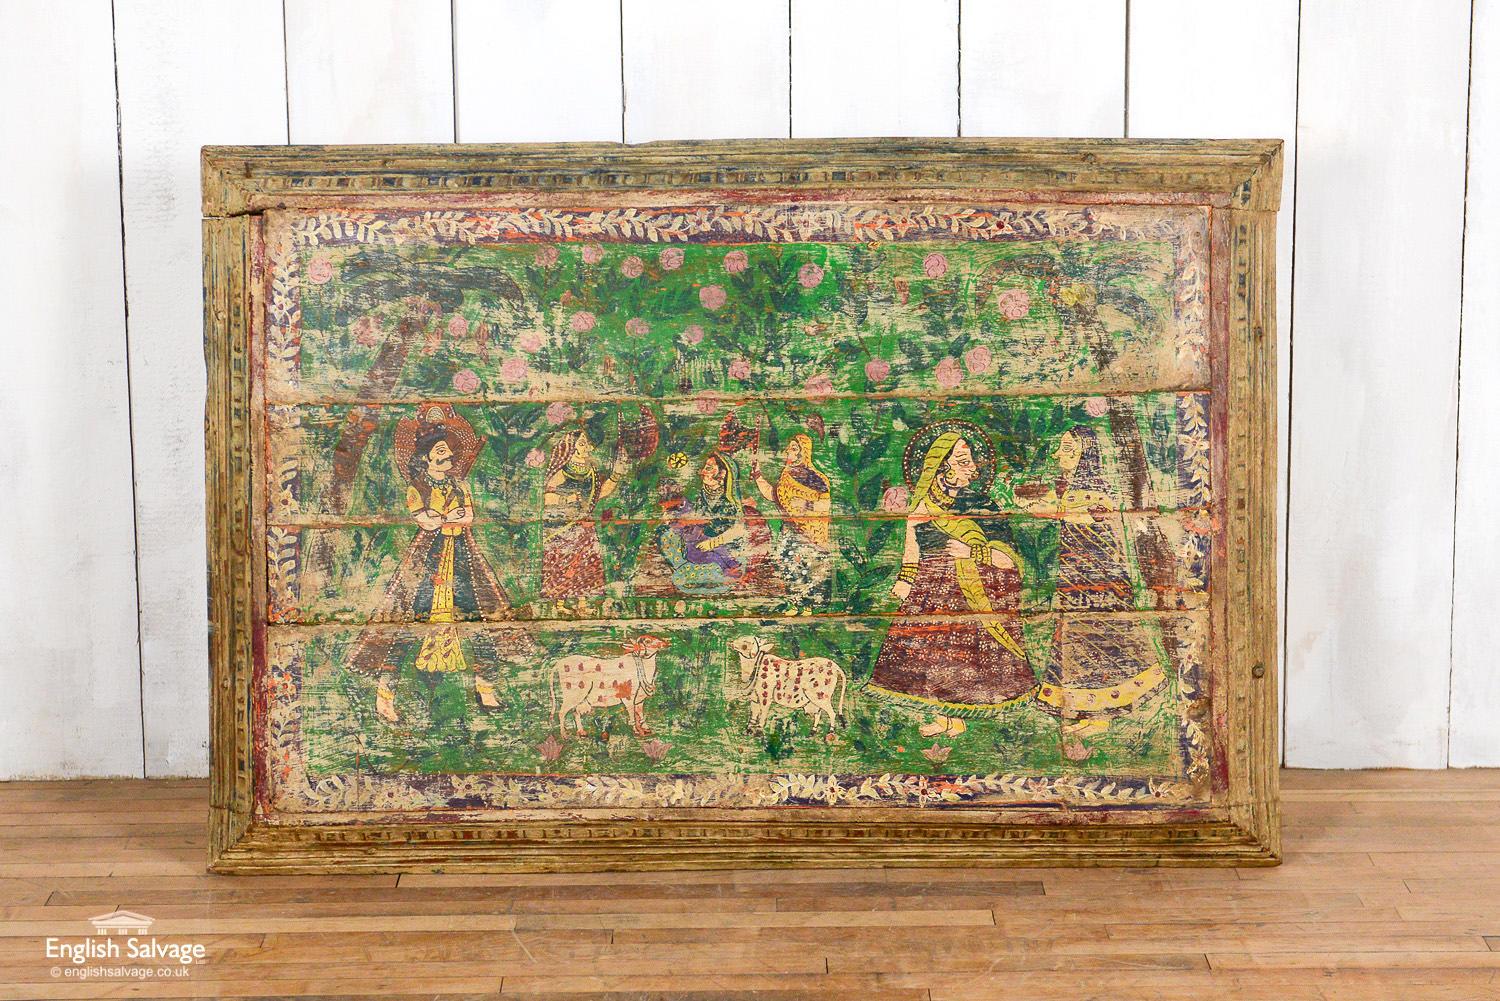 Charming Folk Art style painted teak panel. The painting of a pastoral Indian scene is naïve in style and has a weathered finish commensurate with its age. The distressed paint gives a beautiful patina well suited to the rustic construction of the